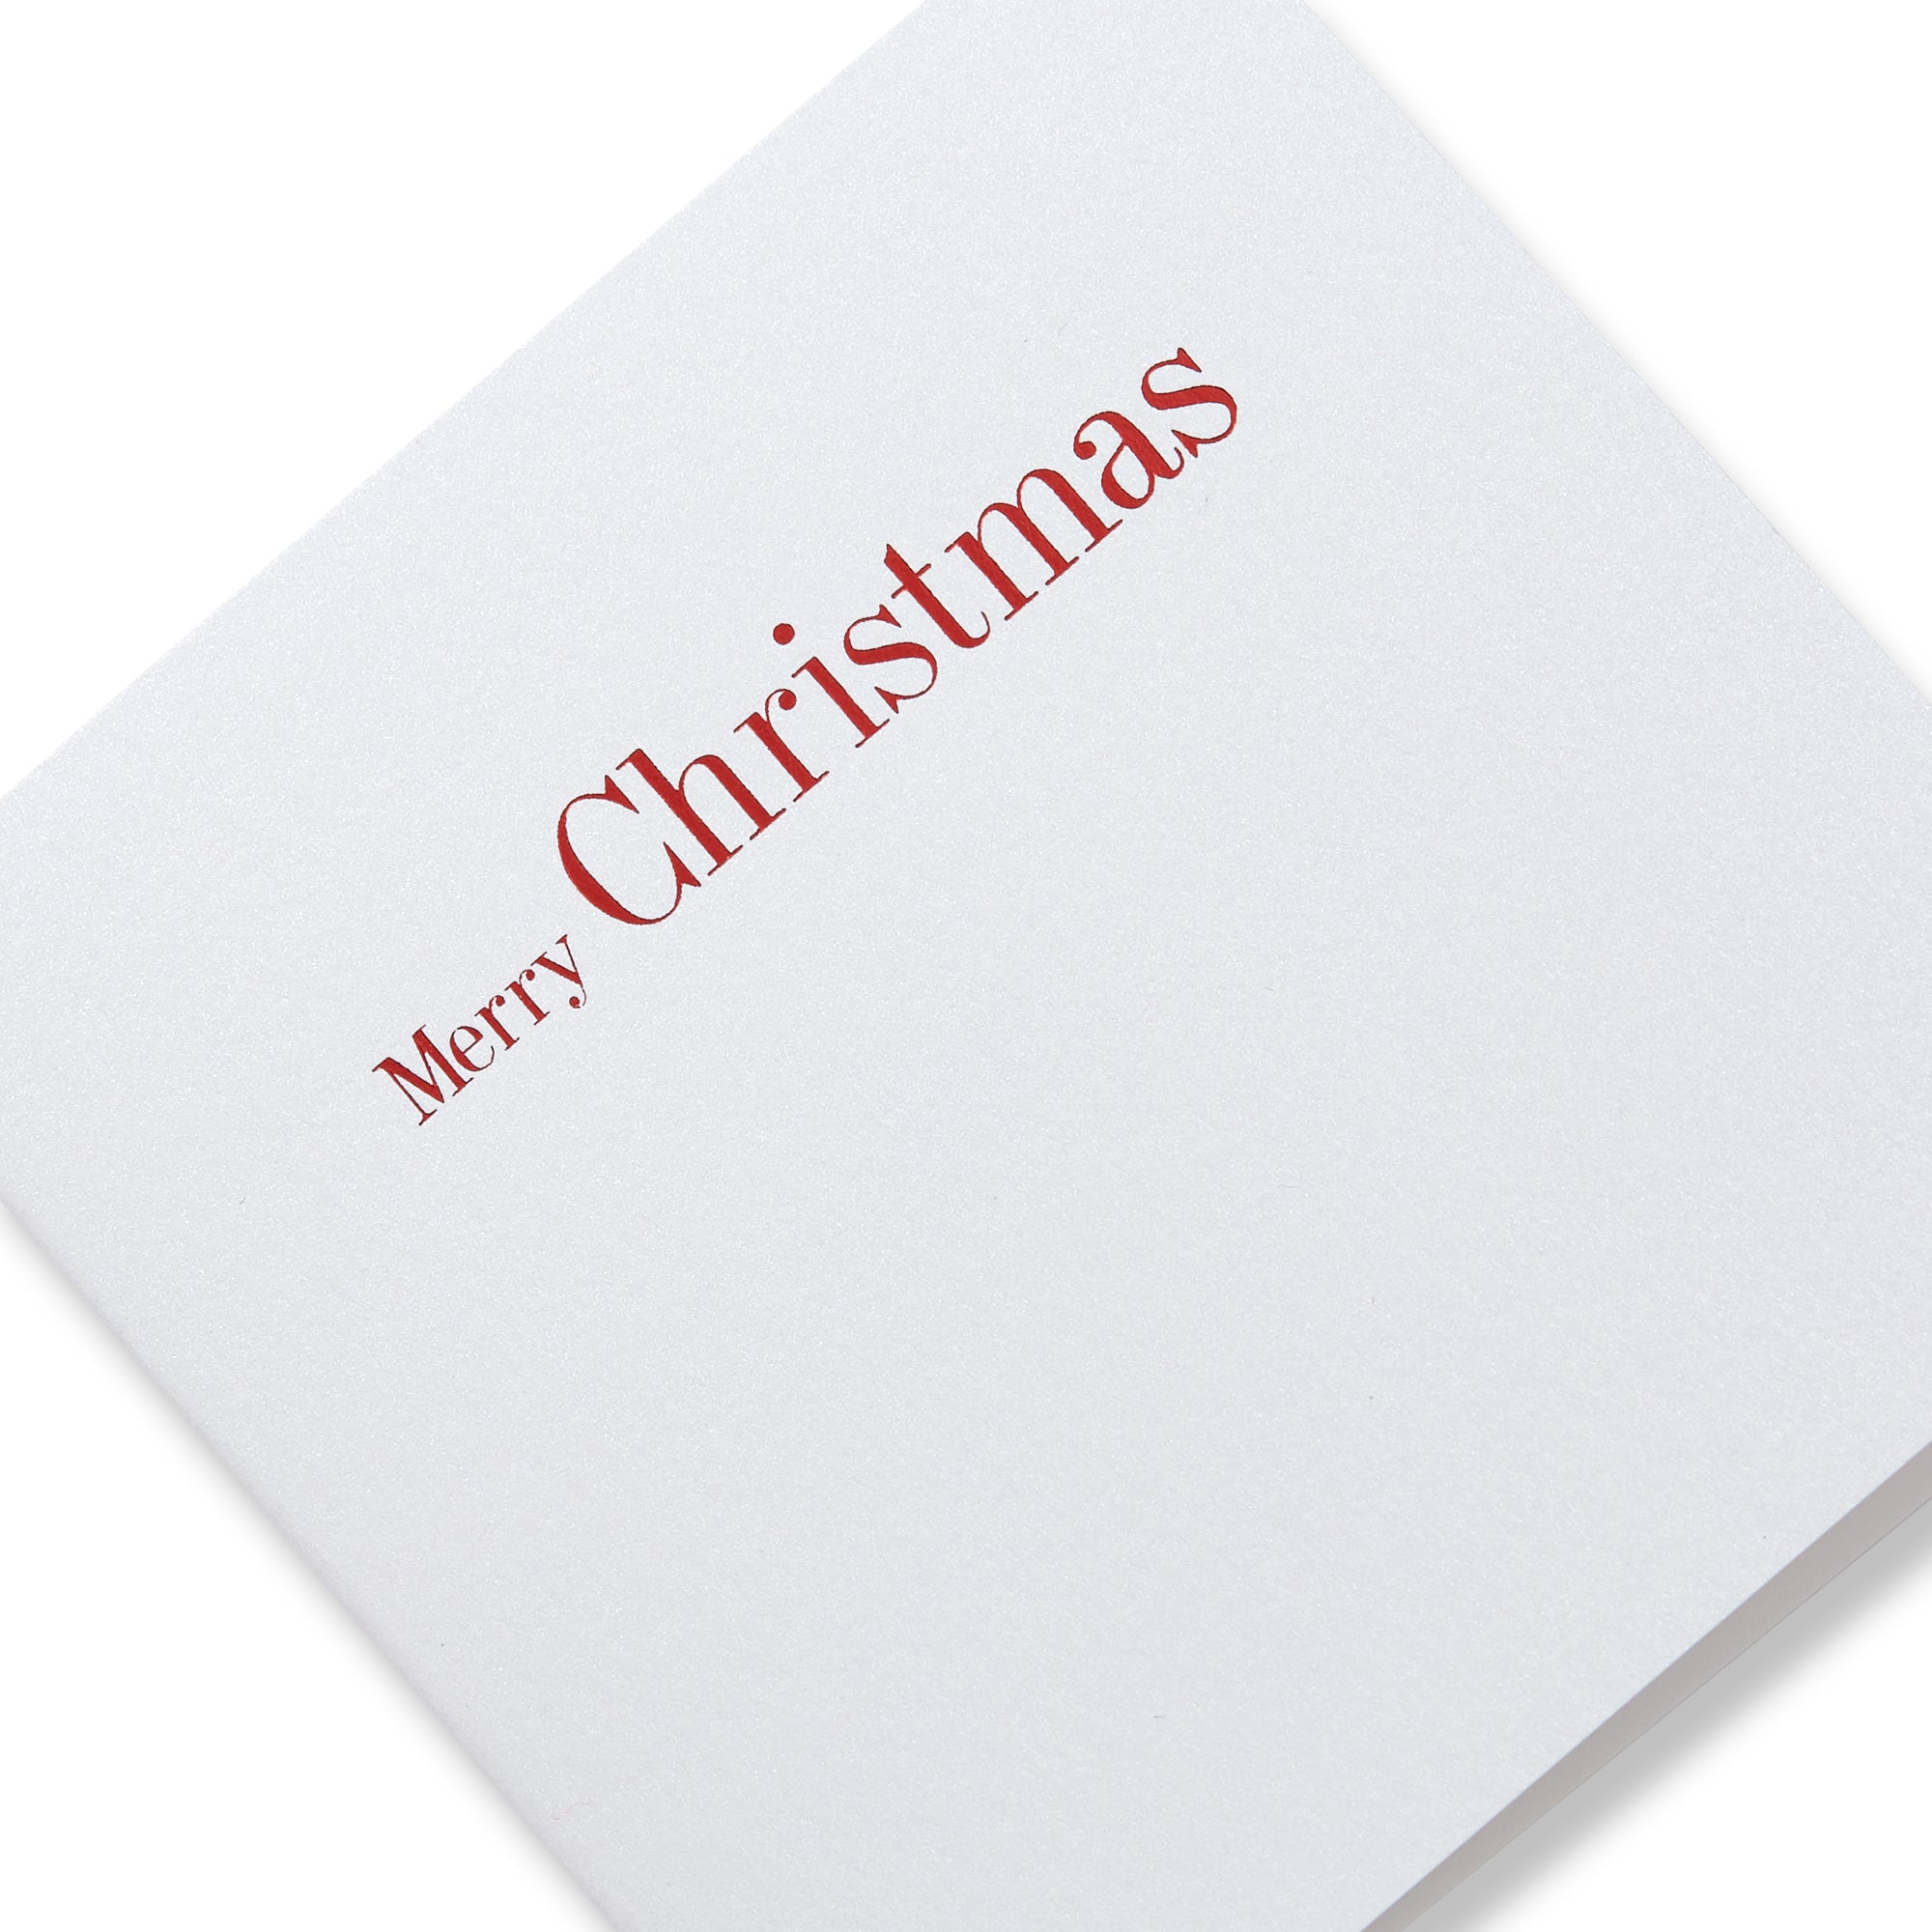 Merry Christmas Red Foiled Mini Cards-Story of Elegance